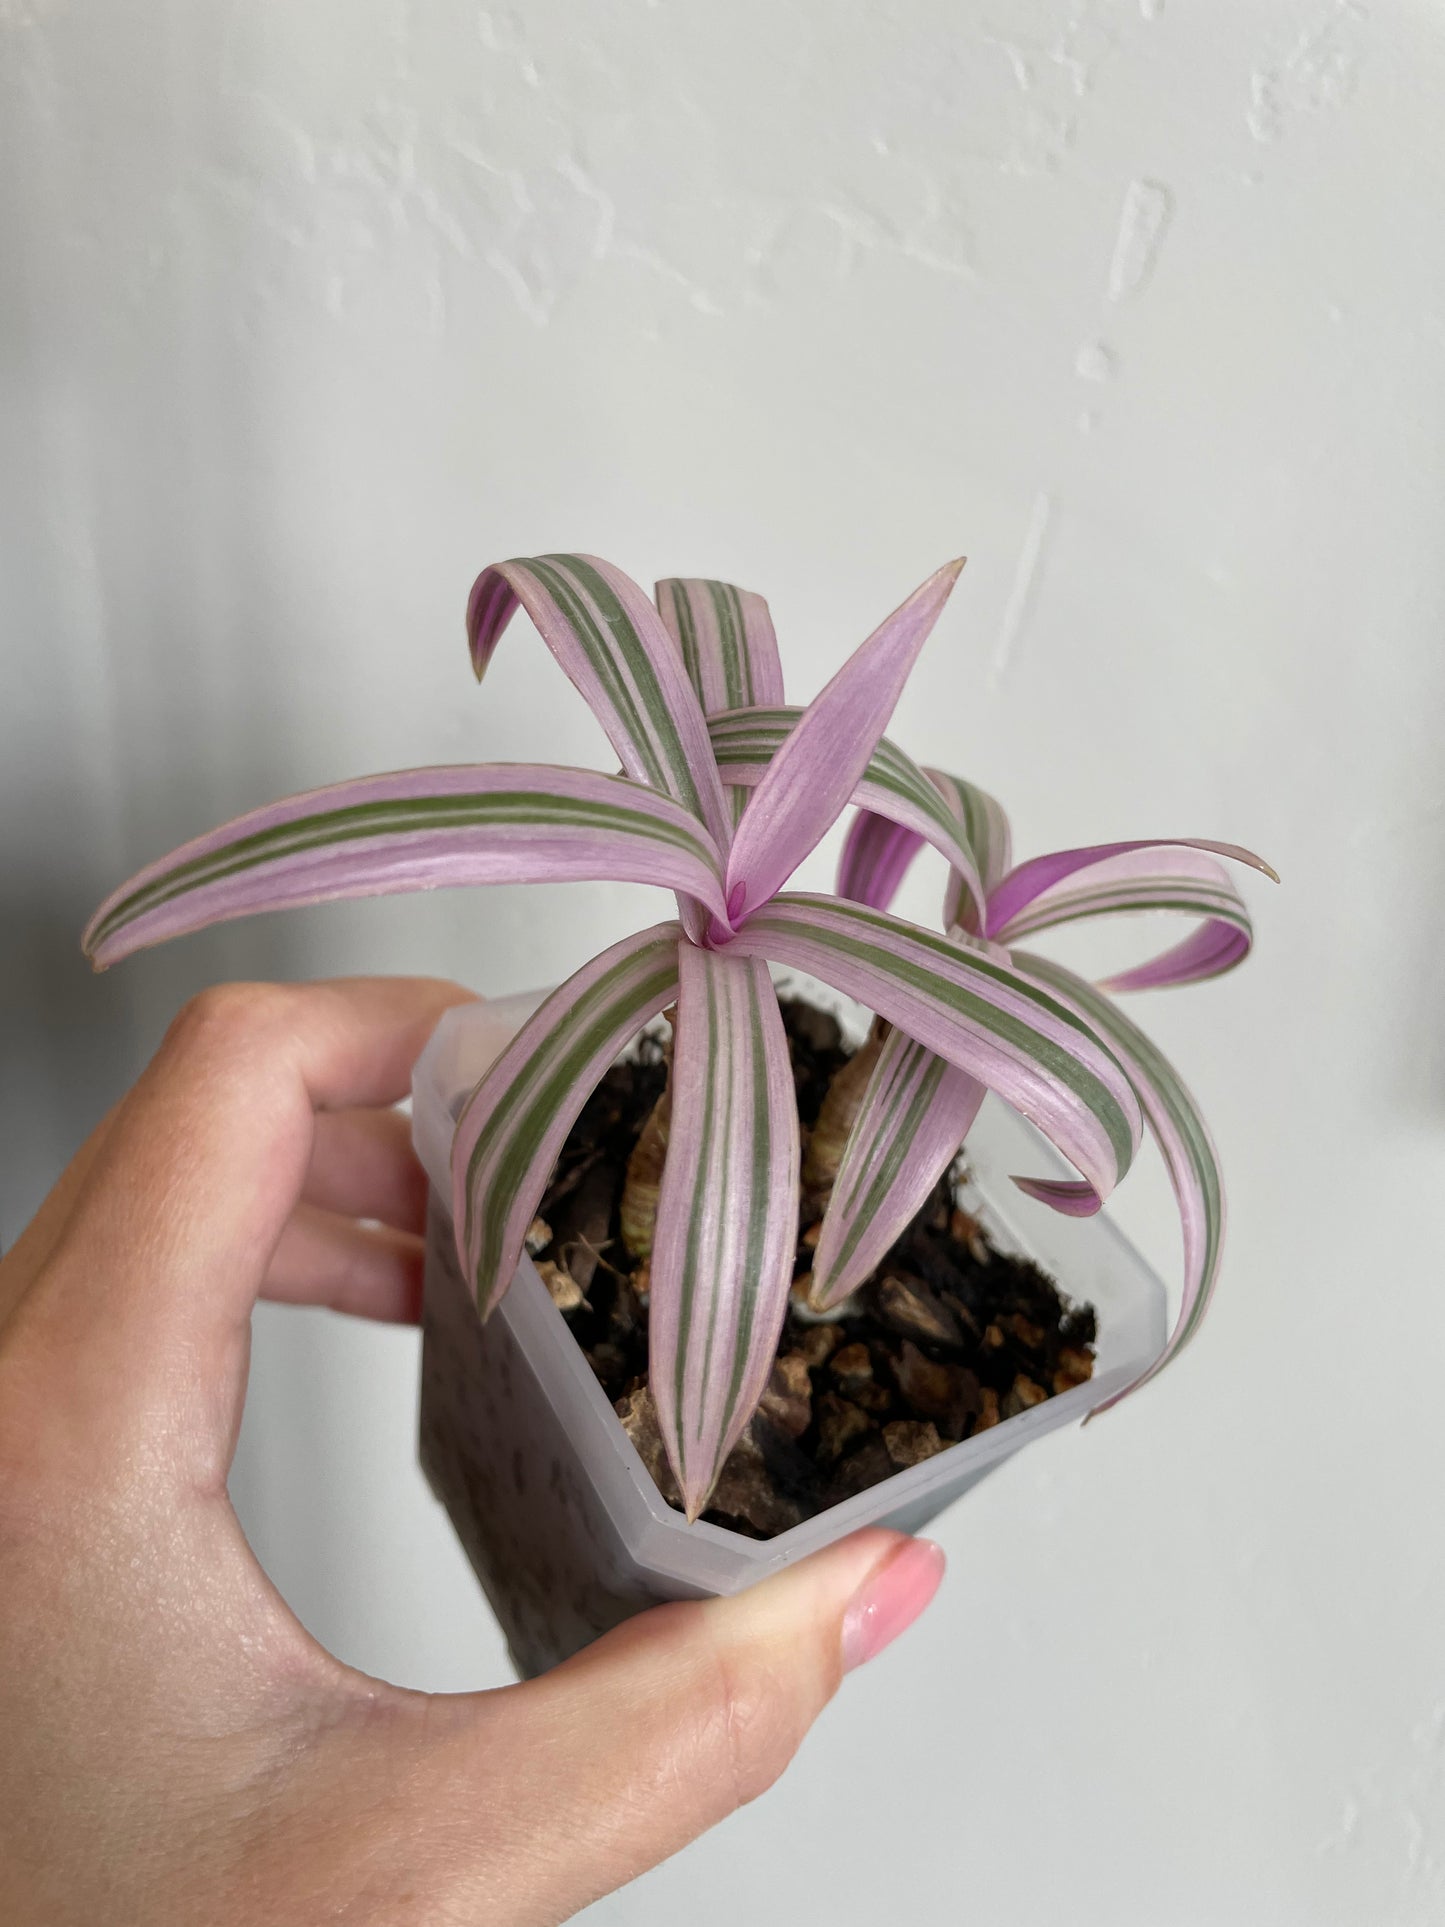 tradescantia spathacea rhoeo oyster tricolor plant pink green